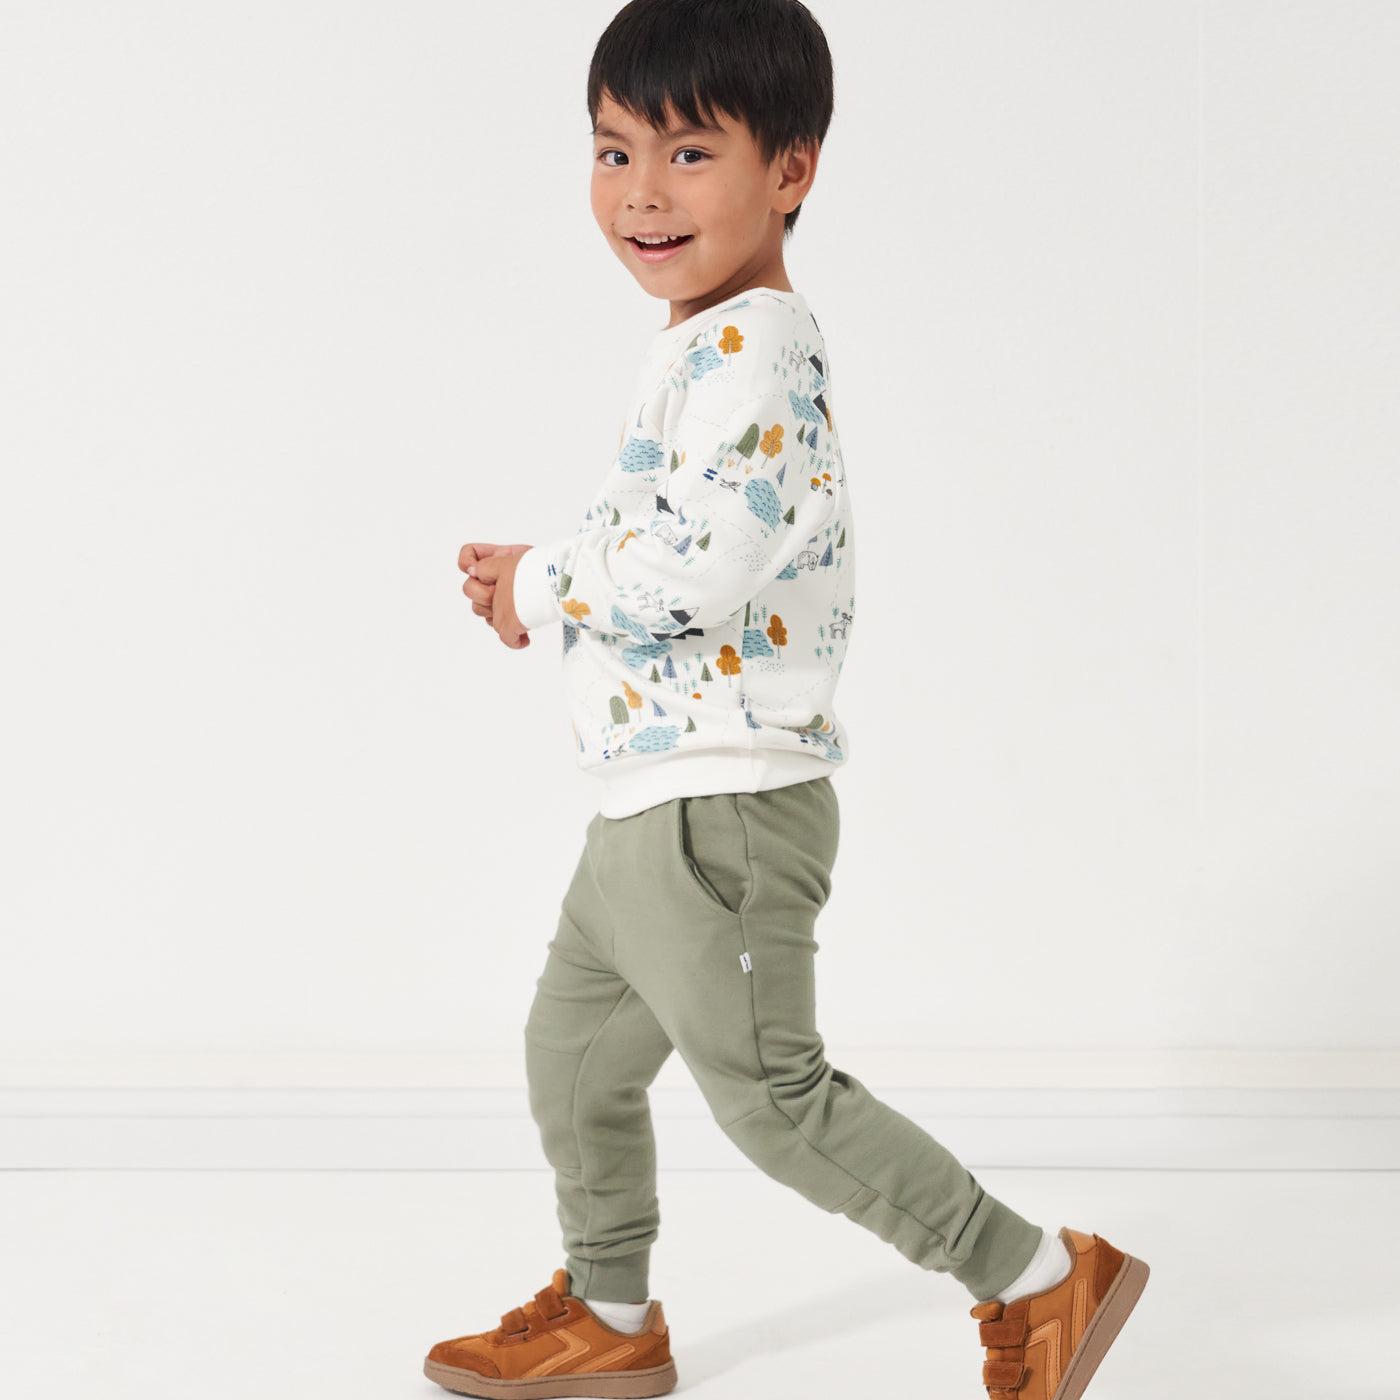 Side view image of a child wearing Moss joggers and a coordinating Let's Explore crewneck sweatshirt